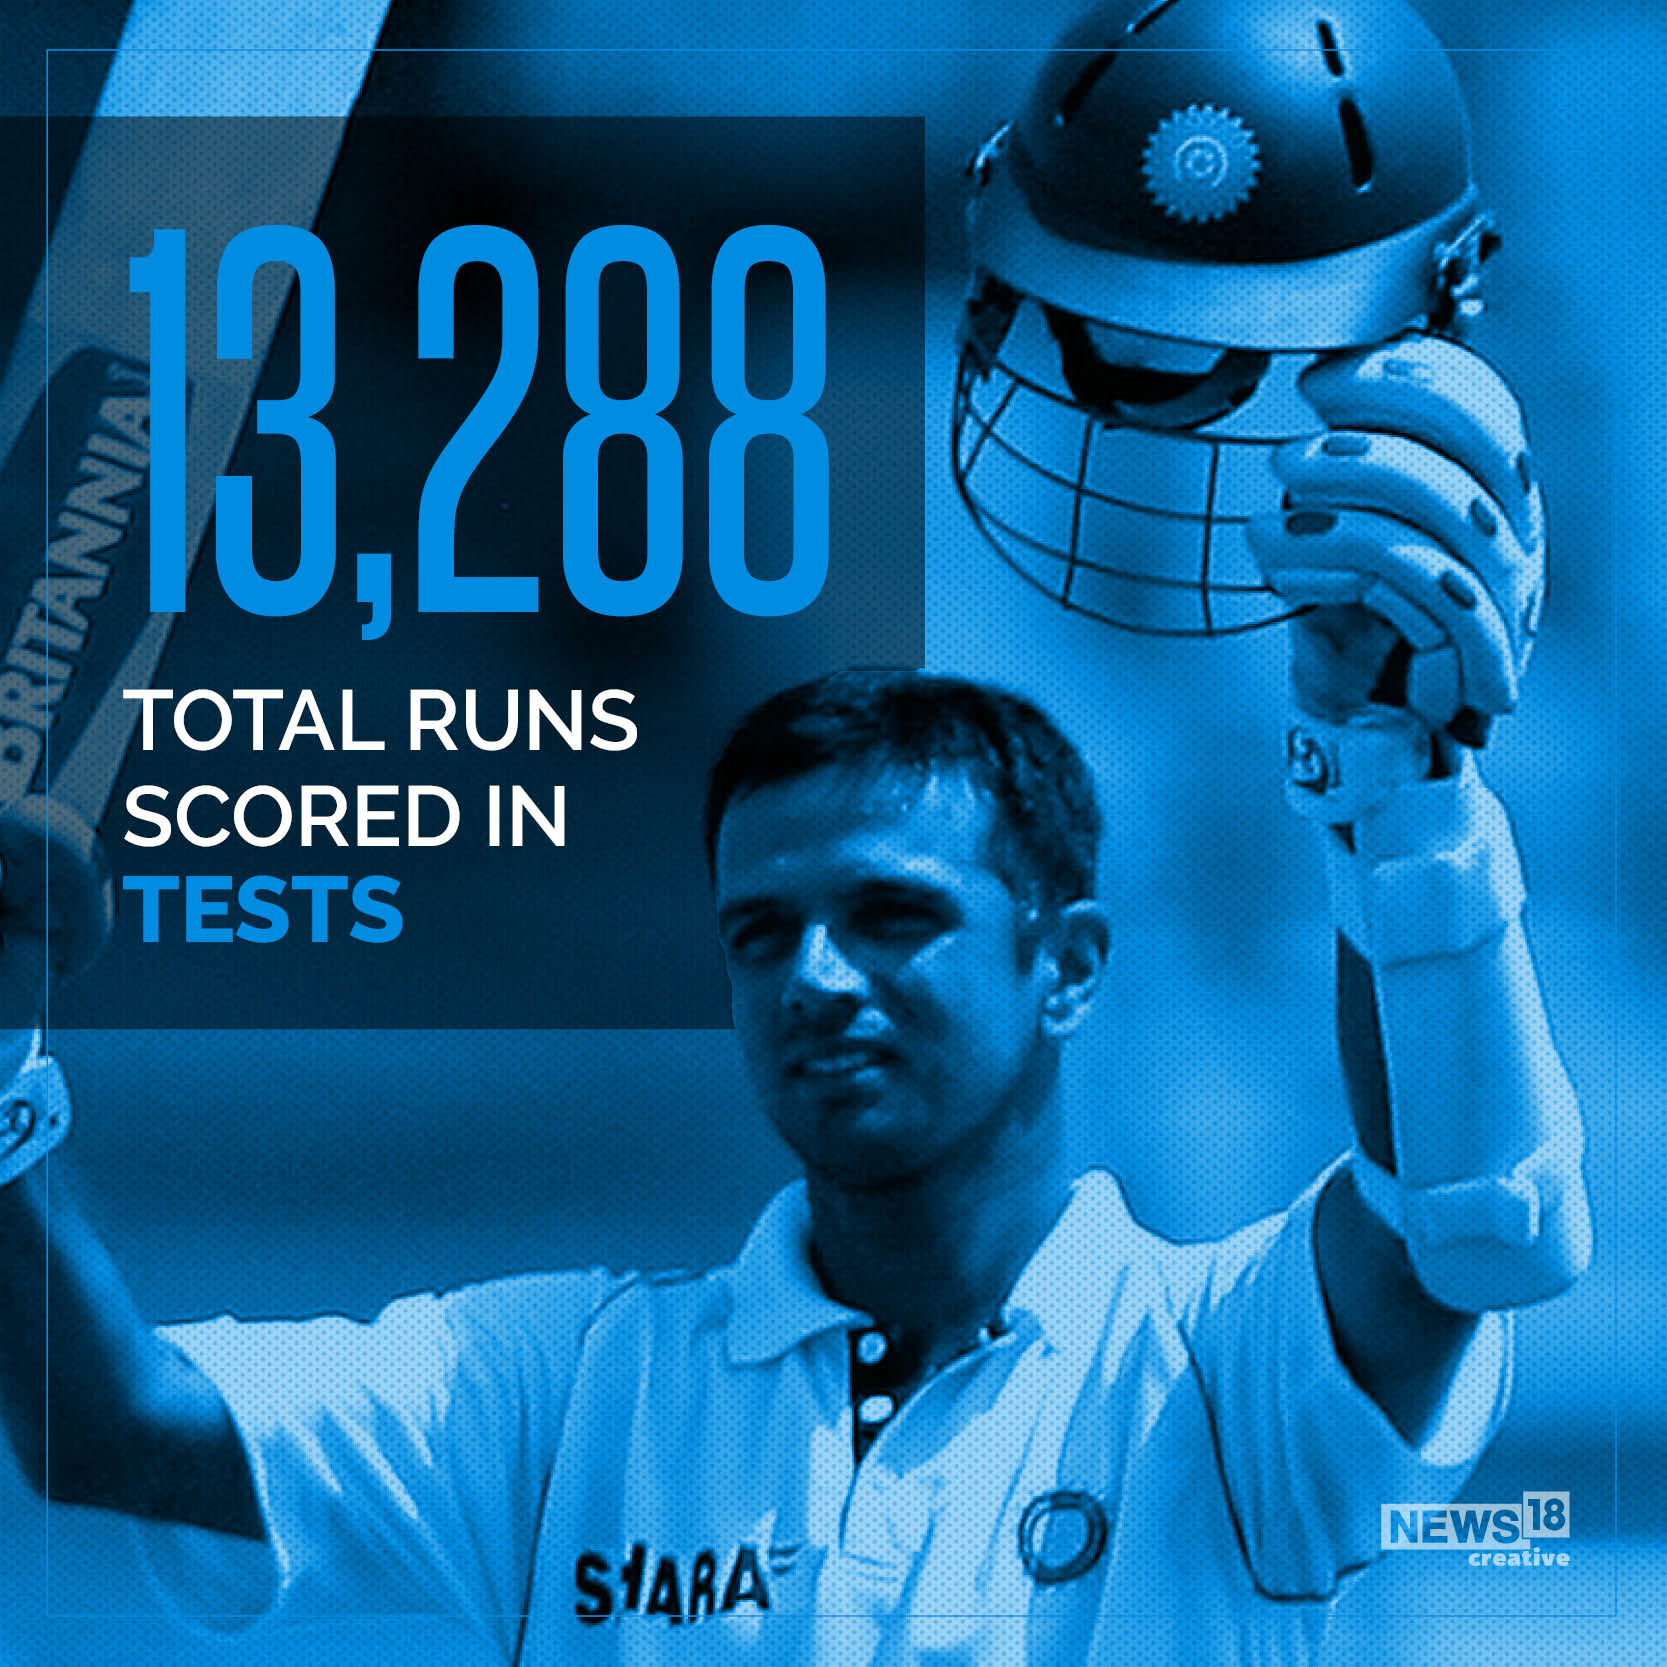 The Wall: On Rahul Dravid's birthday, his career in numbers